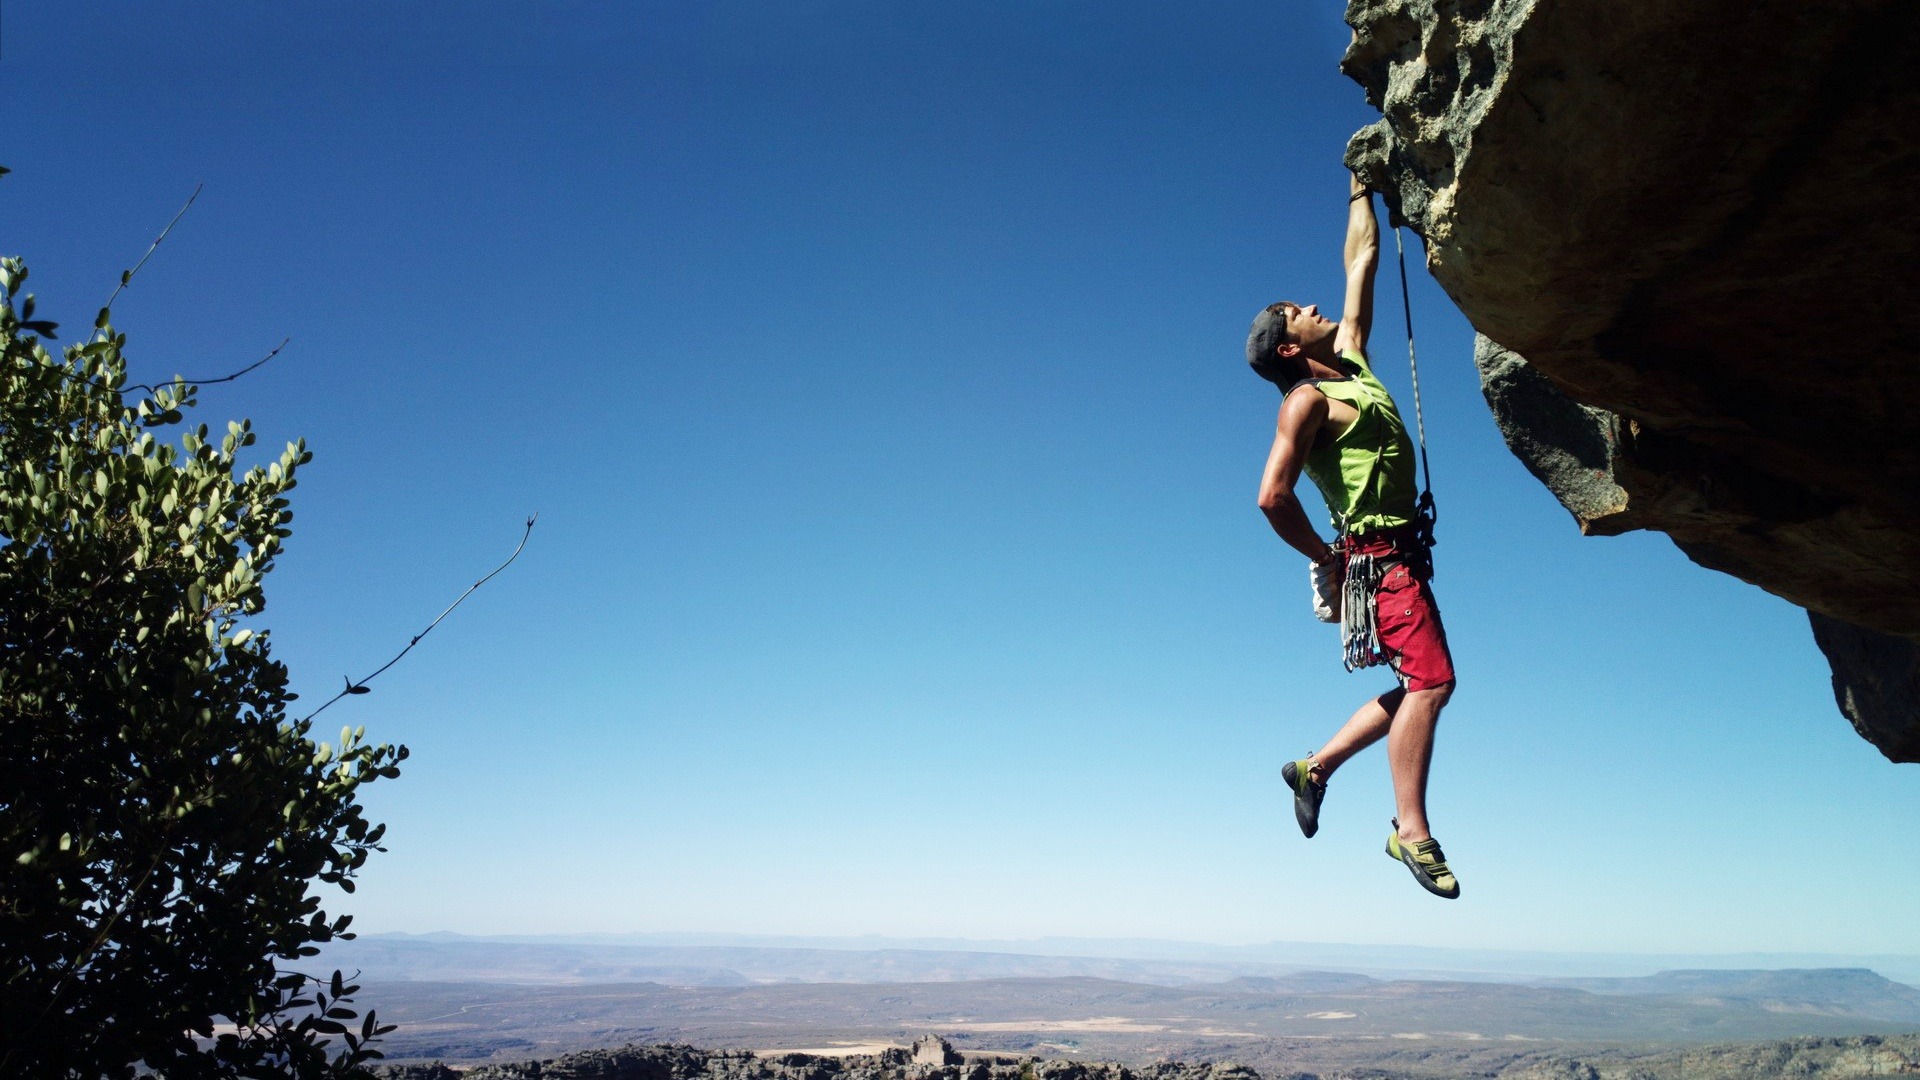 A man wearing a green t-shirt and red shorts with a rope tied around his waist is seen dangling with his left hand hanging on the side of the rock